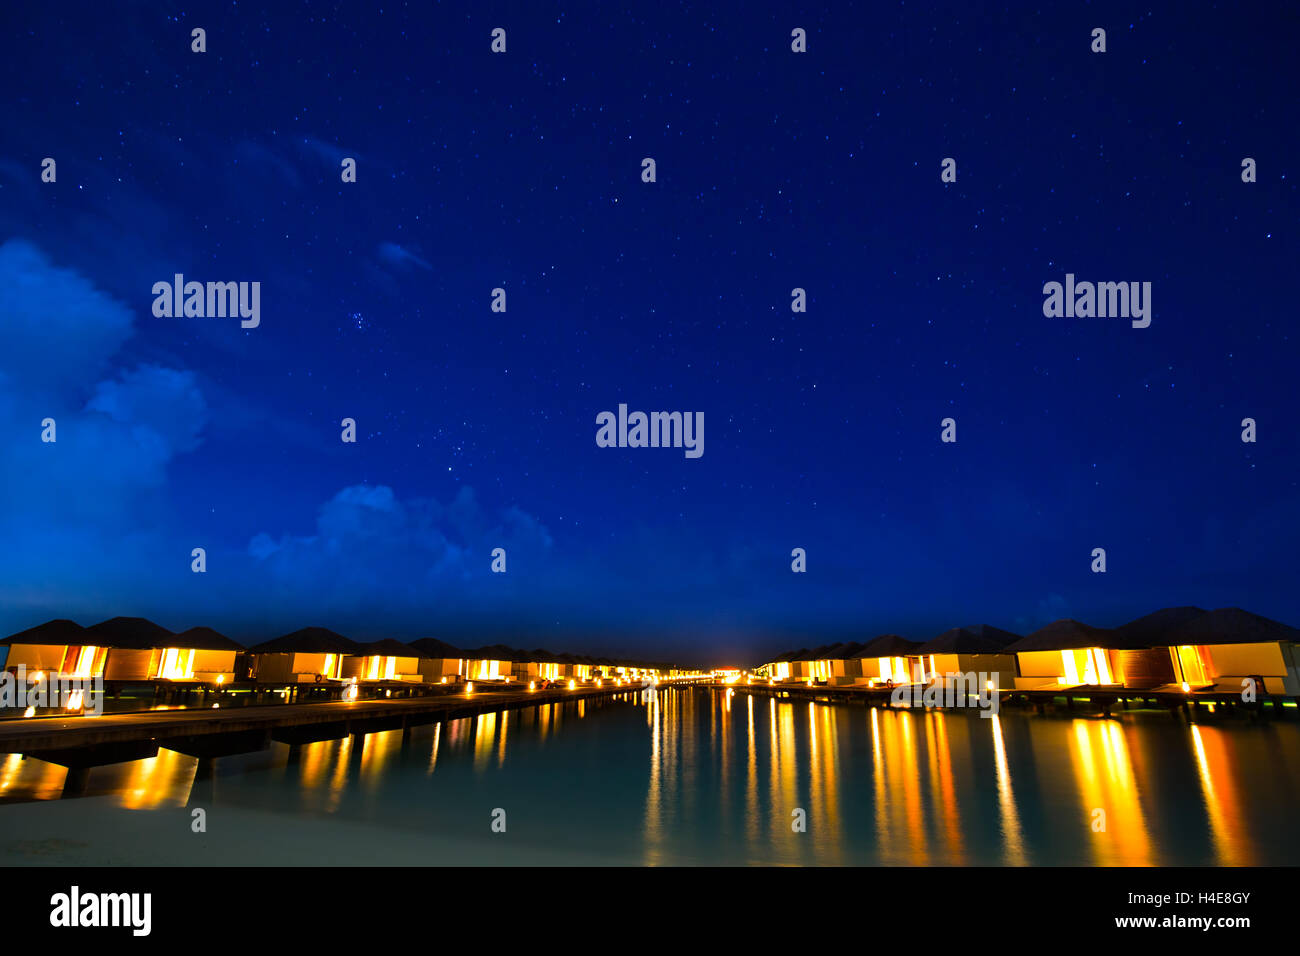 Overwater bungalows on the tropical island resort of Maldives at night with heaven full of stars. Stock Photo